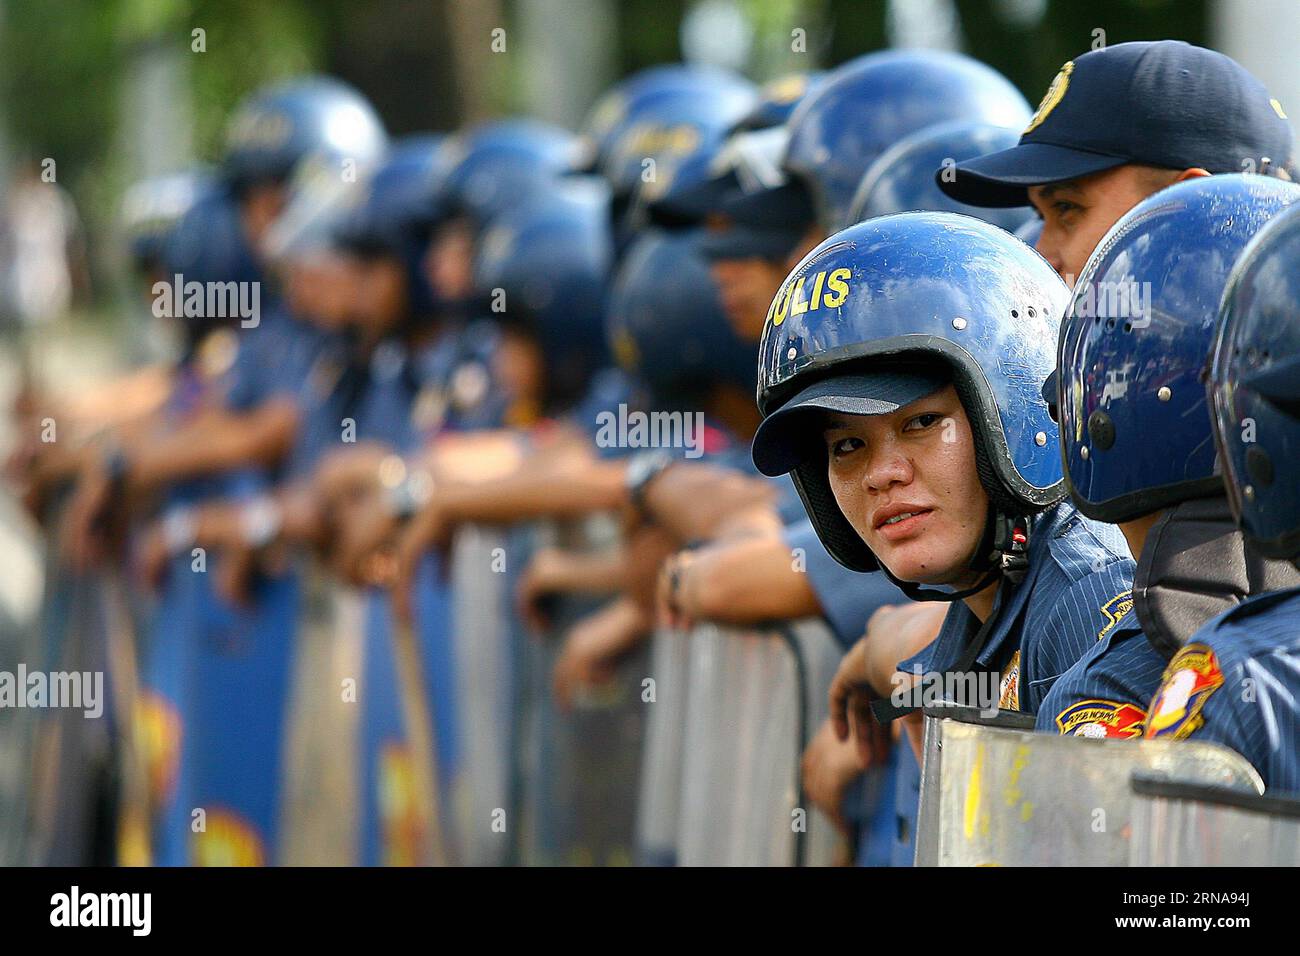 Protest vor US-Botschaft in Manila (160114) -- MANILA, Jan. 14, 2016 -- Policemen hold their truncheons and sheilds as they block activists during a protest rally in front of the U.S. Embassy in Manila, the Philippines, Jan. 14, 2016. The activists are calling for an end to the Enhanced Defense Cooperation Agreement (EDCA) after the Philippine Supreme Court decided that the Philippines defense cooperation deal with the United States is constitutional and does not need the concurrence of the Senate. ) (zjy) PHILIPPINES-MANILA-ANTI-EDCA-PROTEST RouellexUmali PUBLICATIONxNOTxINxCHN   Protest befo Stock Photo